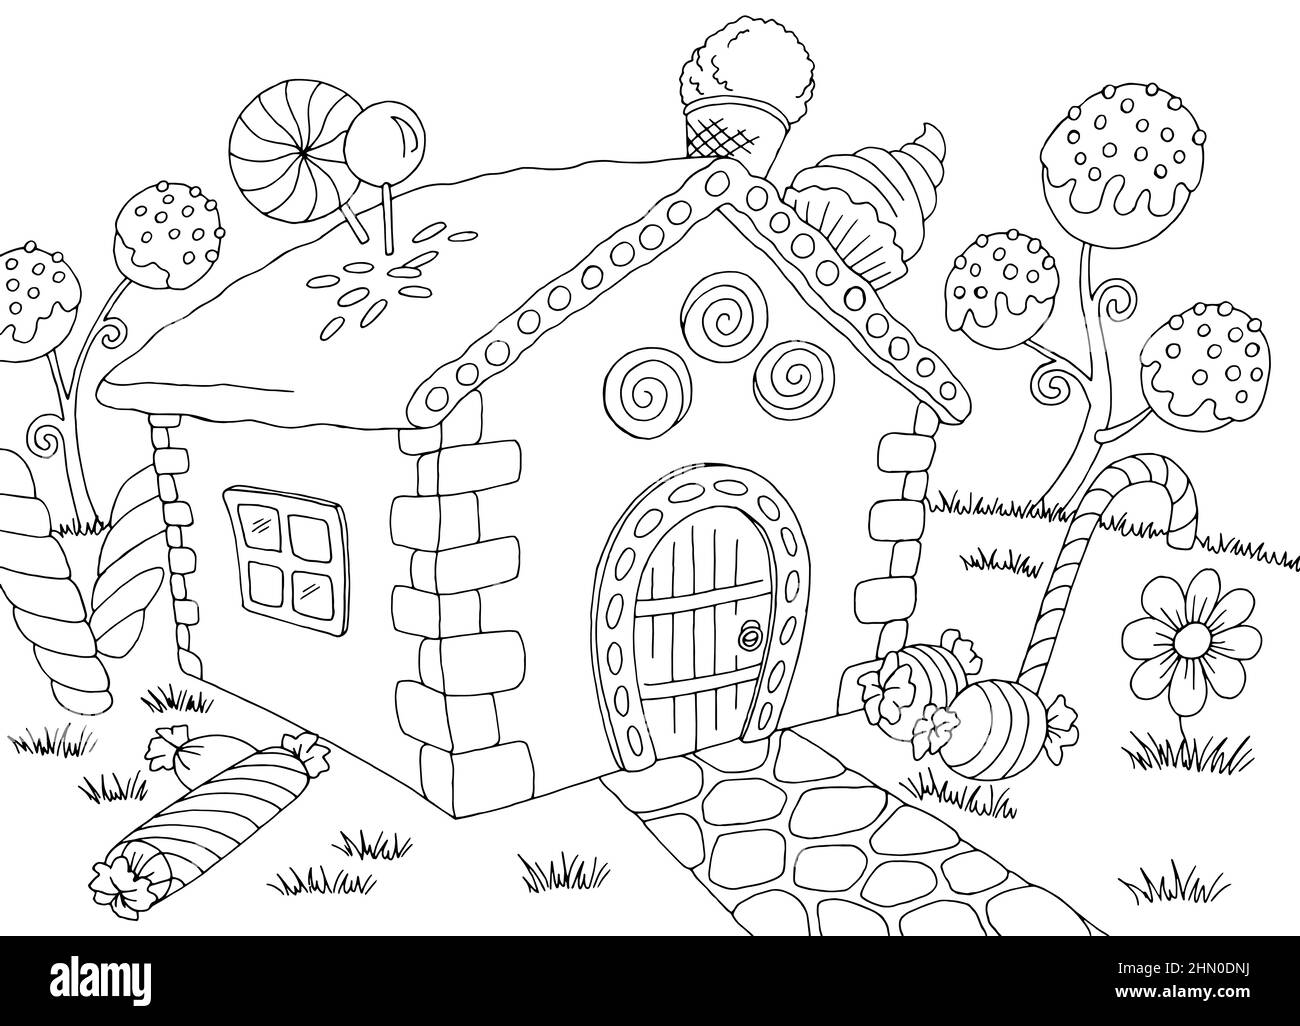 Candy house building exterior graphic black white landscape sketch illustration vector Stock Vector